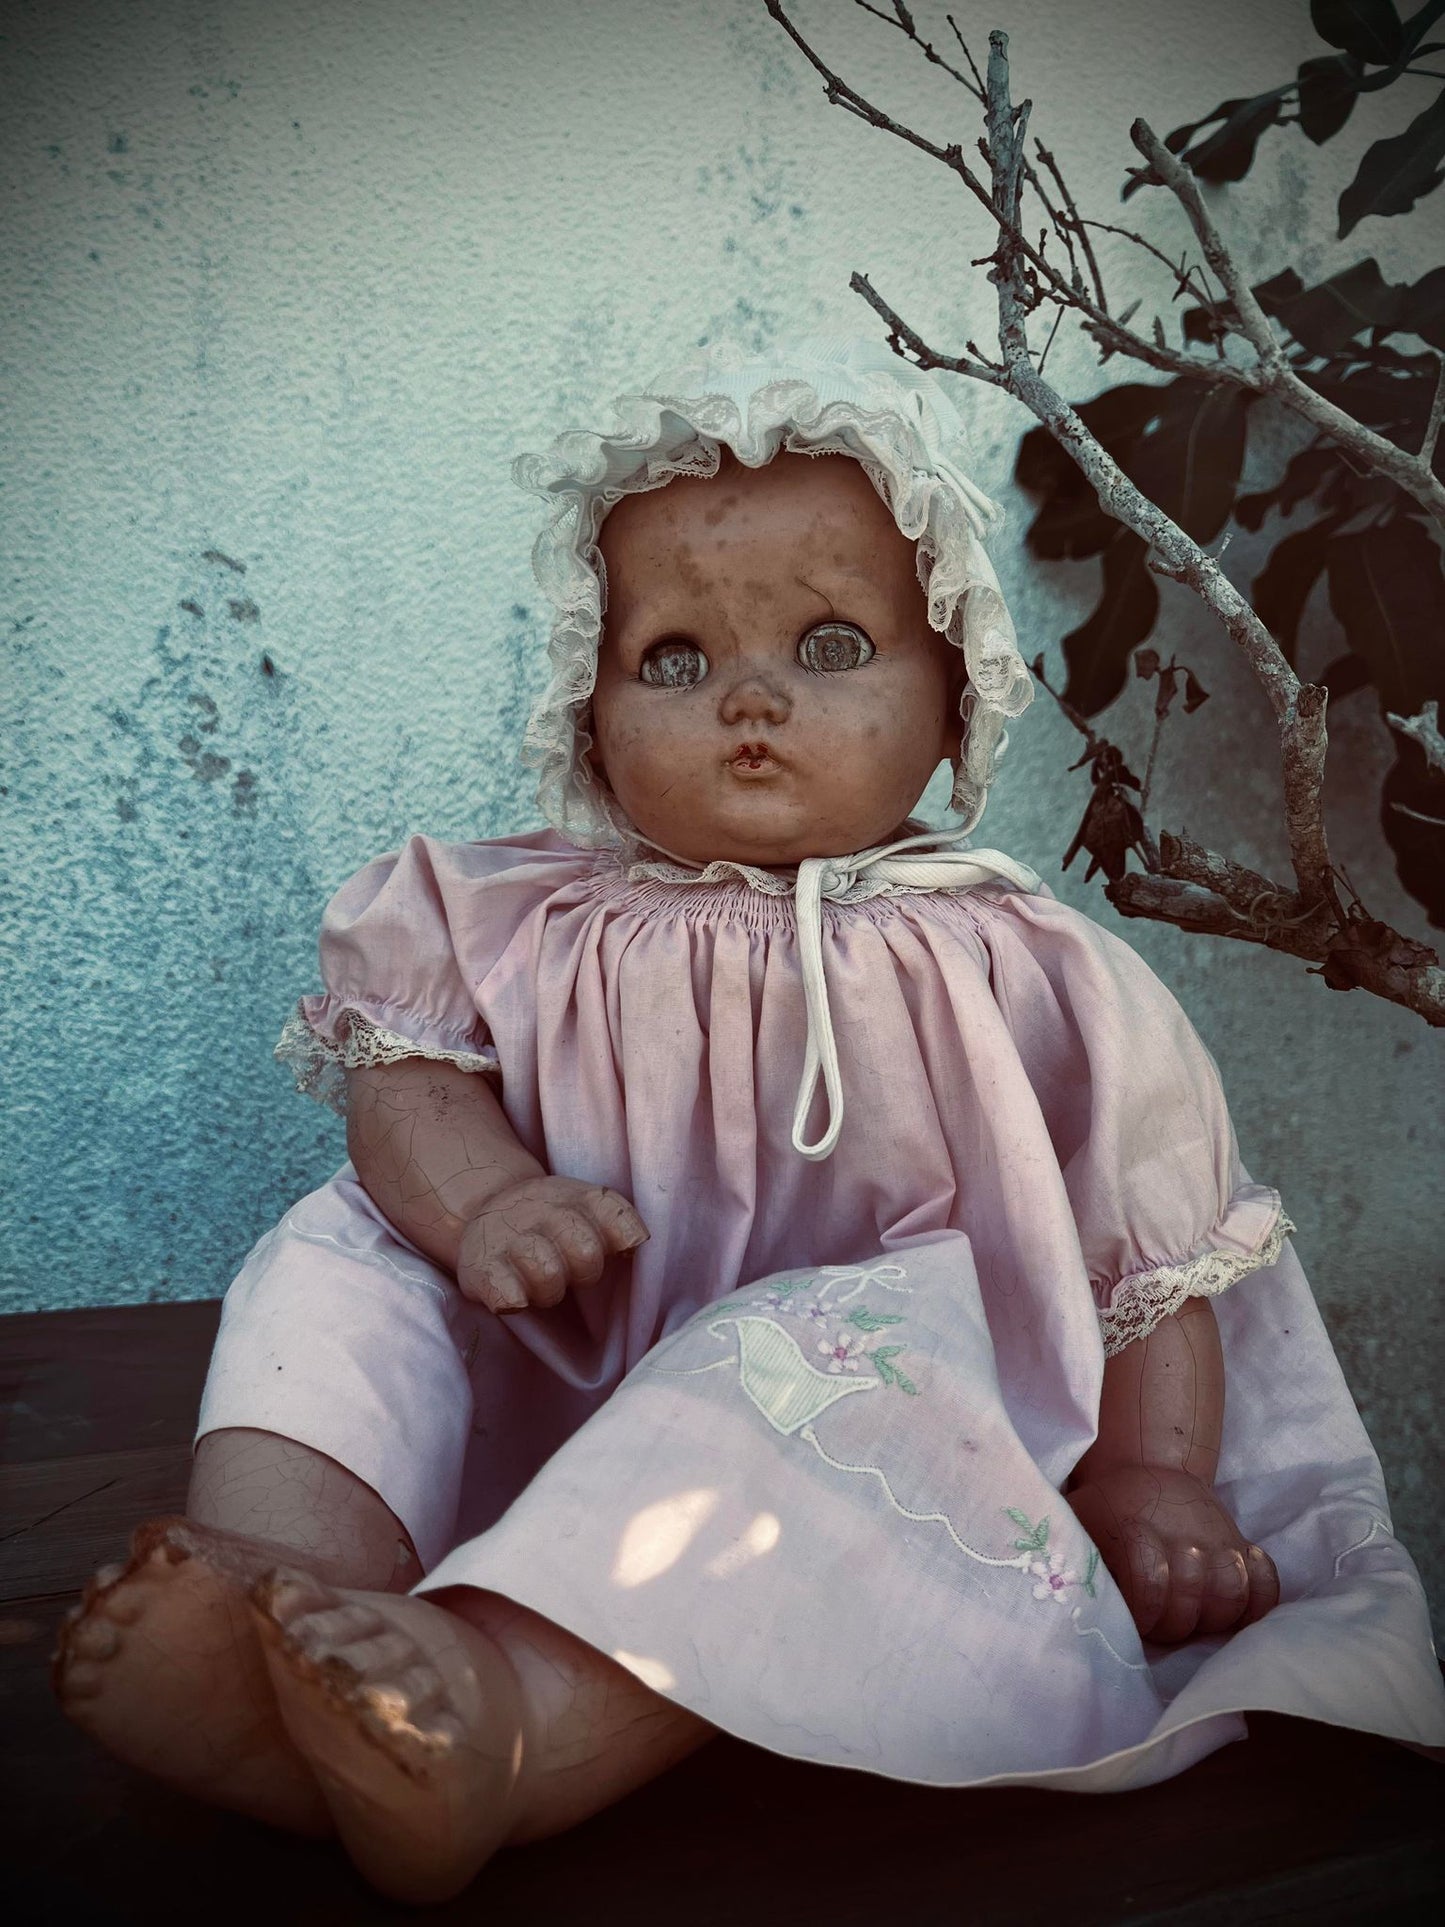 Meet Lana 22" Antique Composition Doll Witchy Creepy Haunted Spirit Infected Scary Spooky Possessed Positive Energy Oddity Gift Idea Vessel